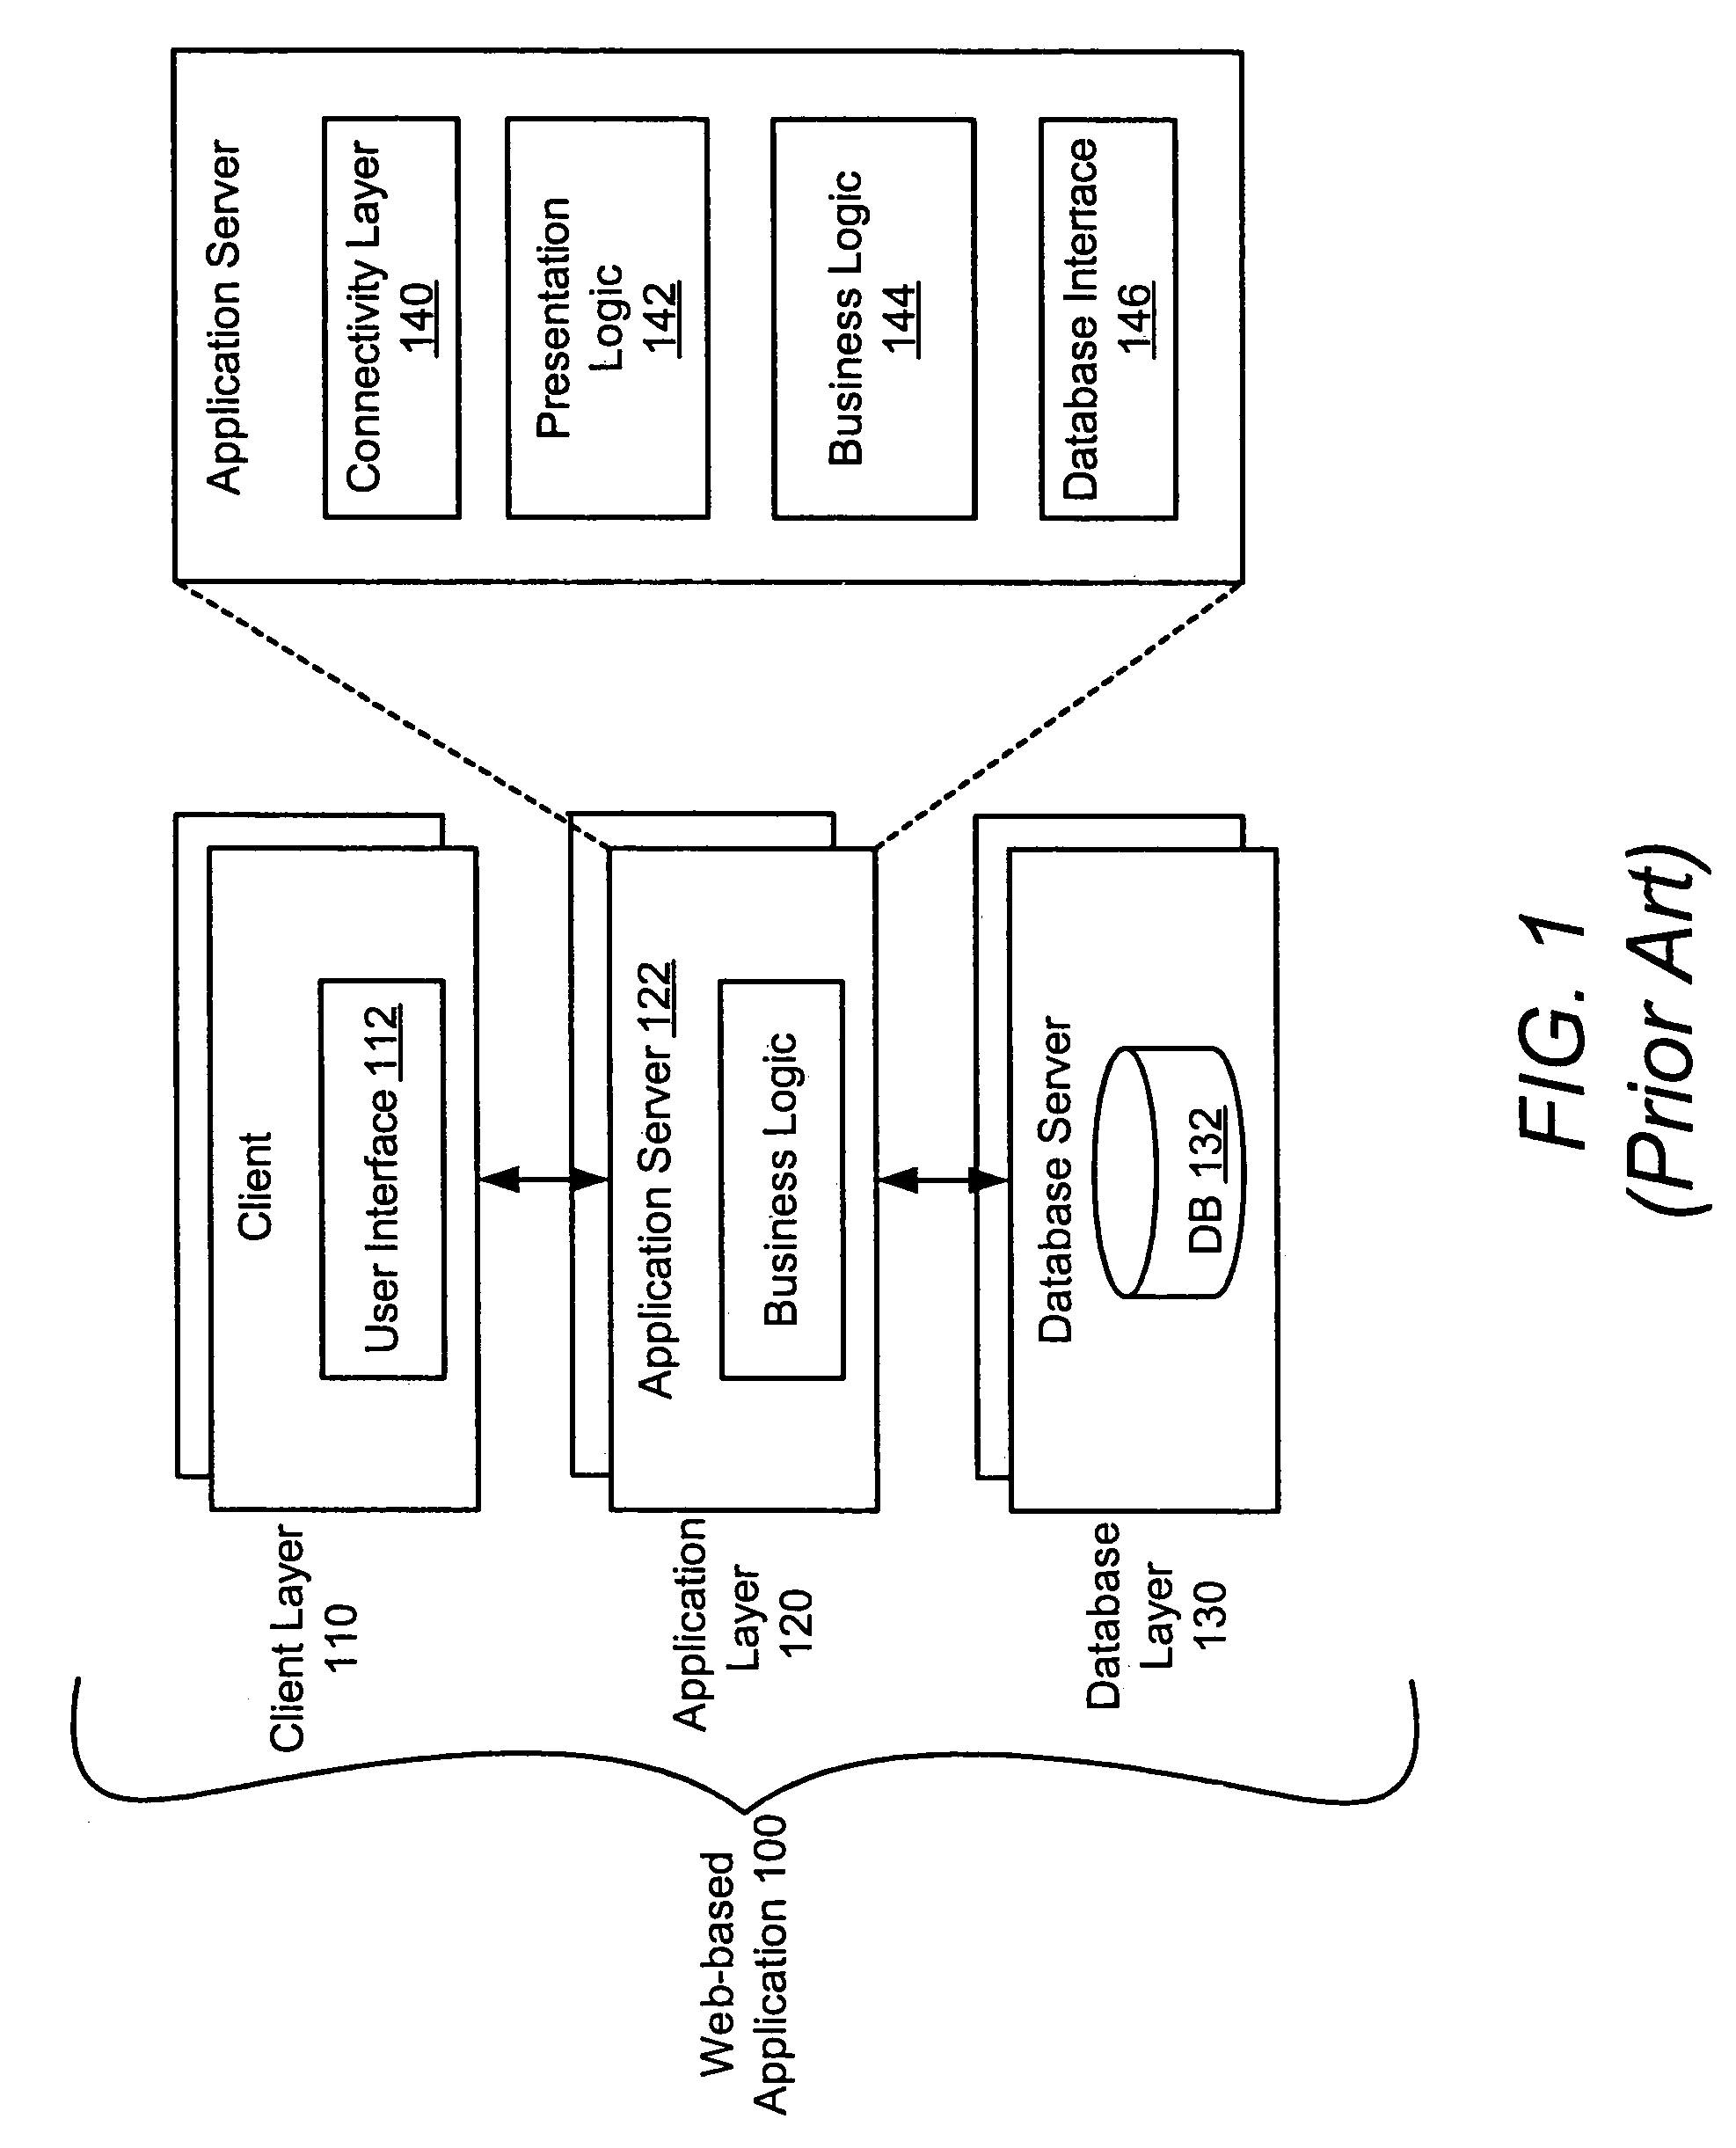 System and method for interacting with a persistence layer